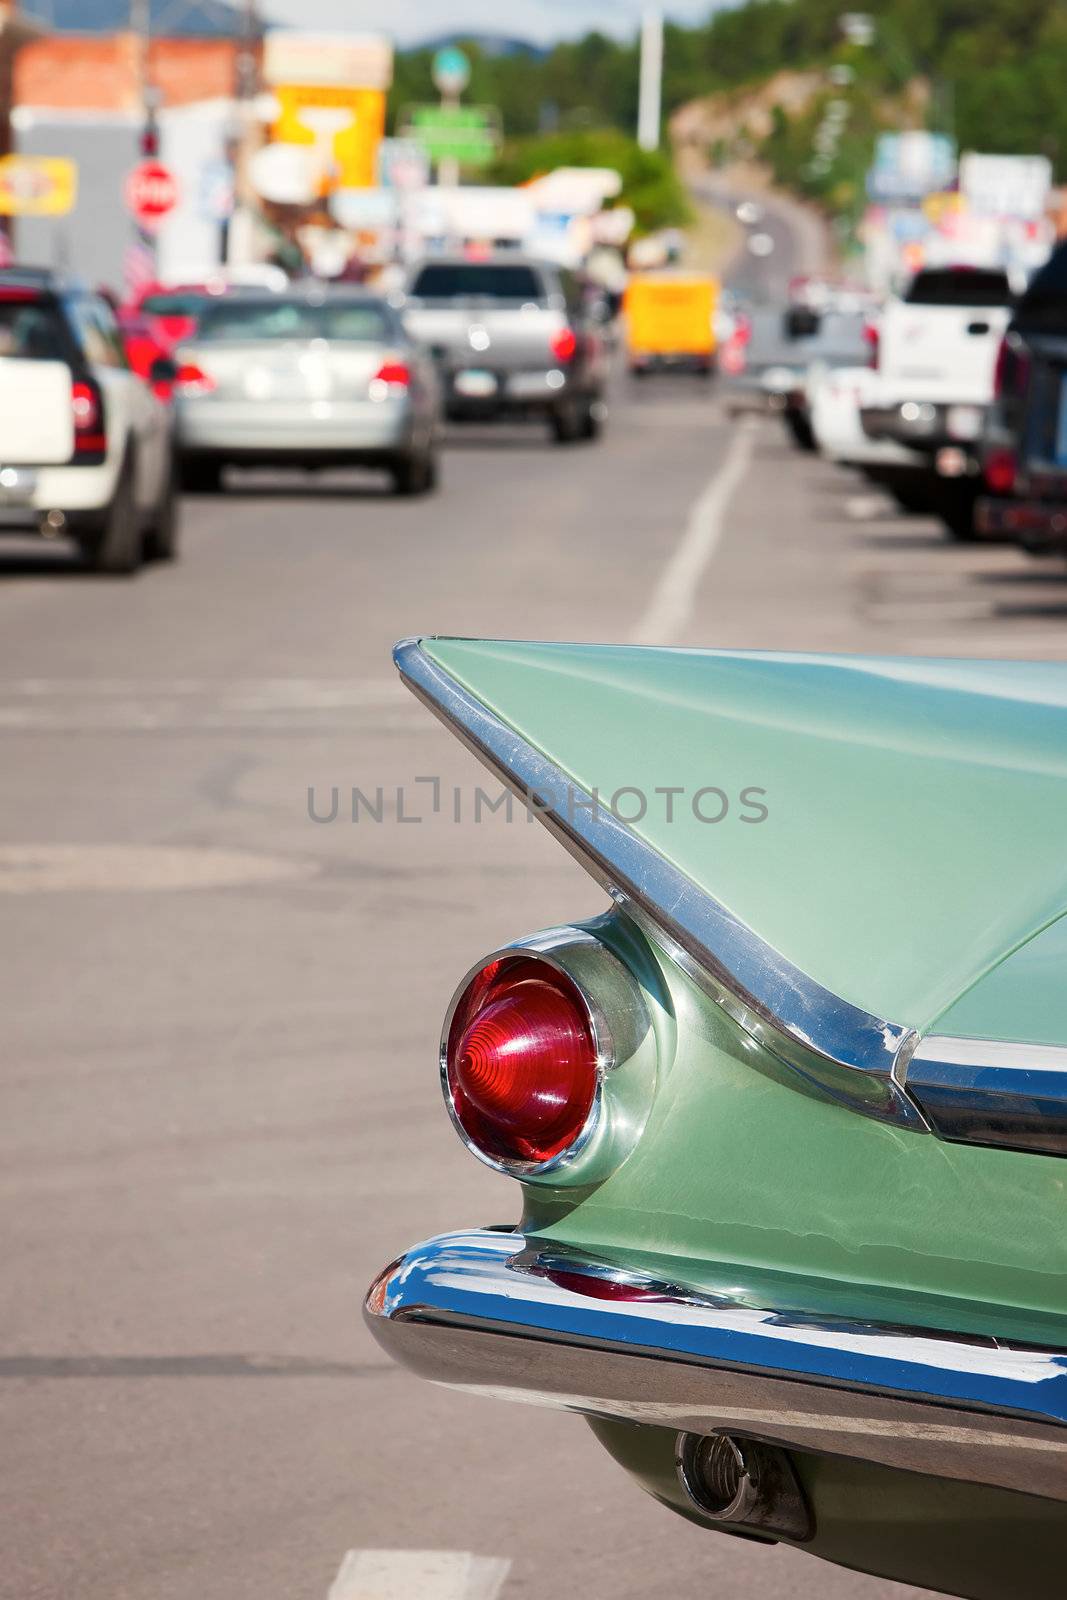 Tail fin on Route 66 by Creatista